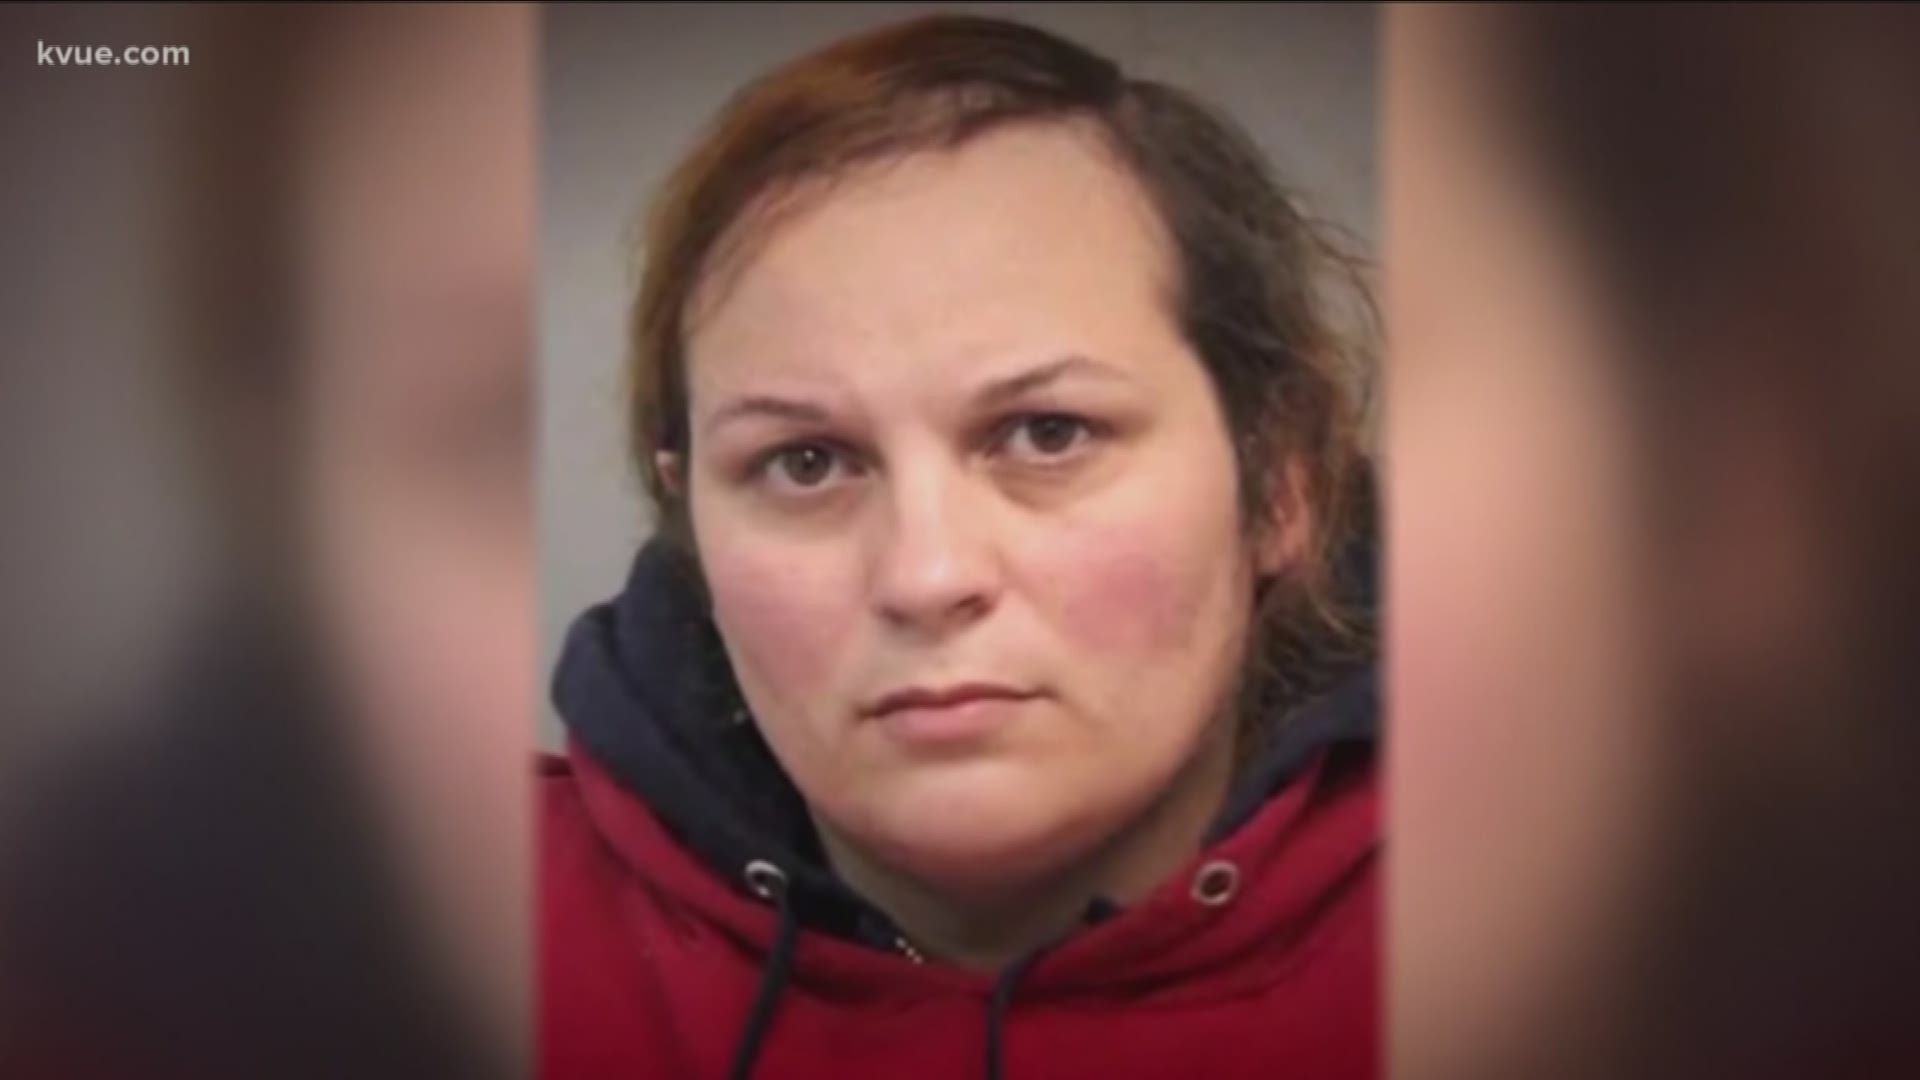 Magen Fieramusca's court date is scheduled for March 11, but it could be pushed back to later in the month. She's accused of killing Austin mother, Heidi Broussard.